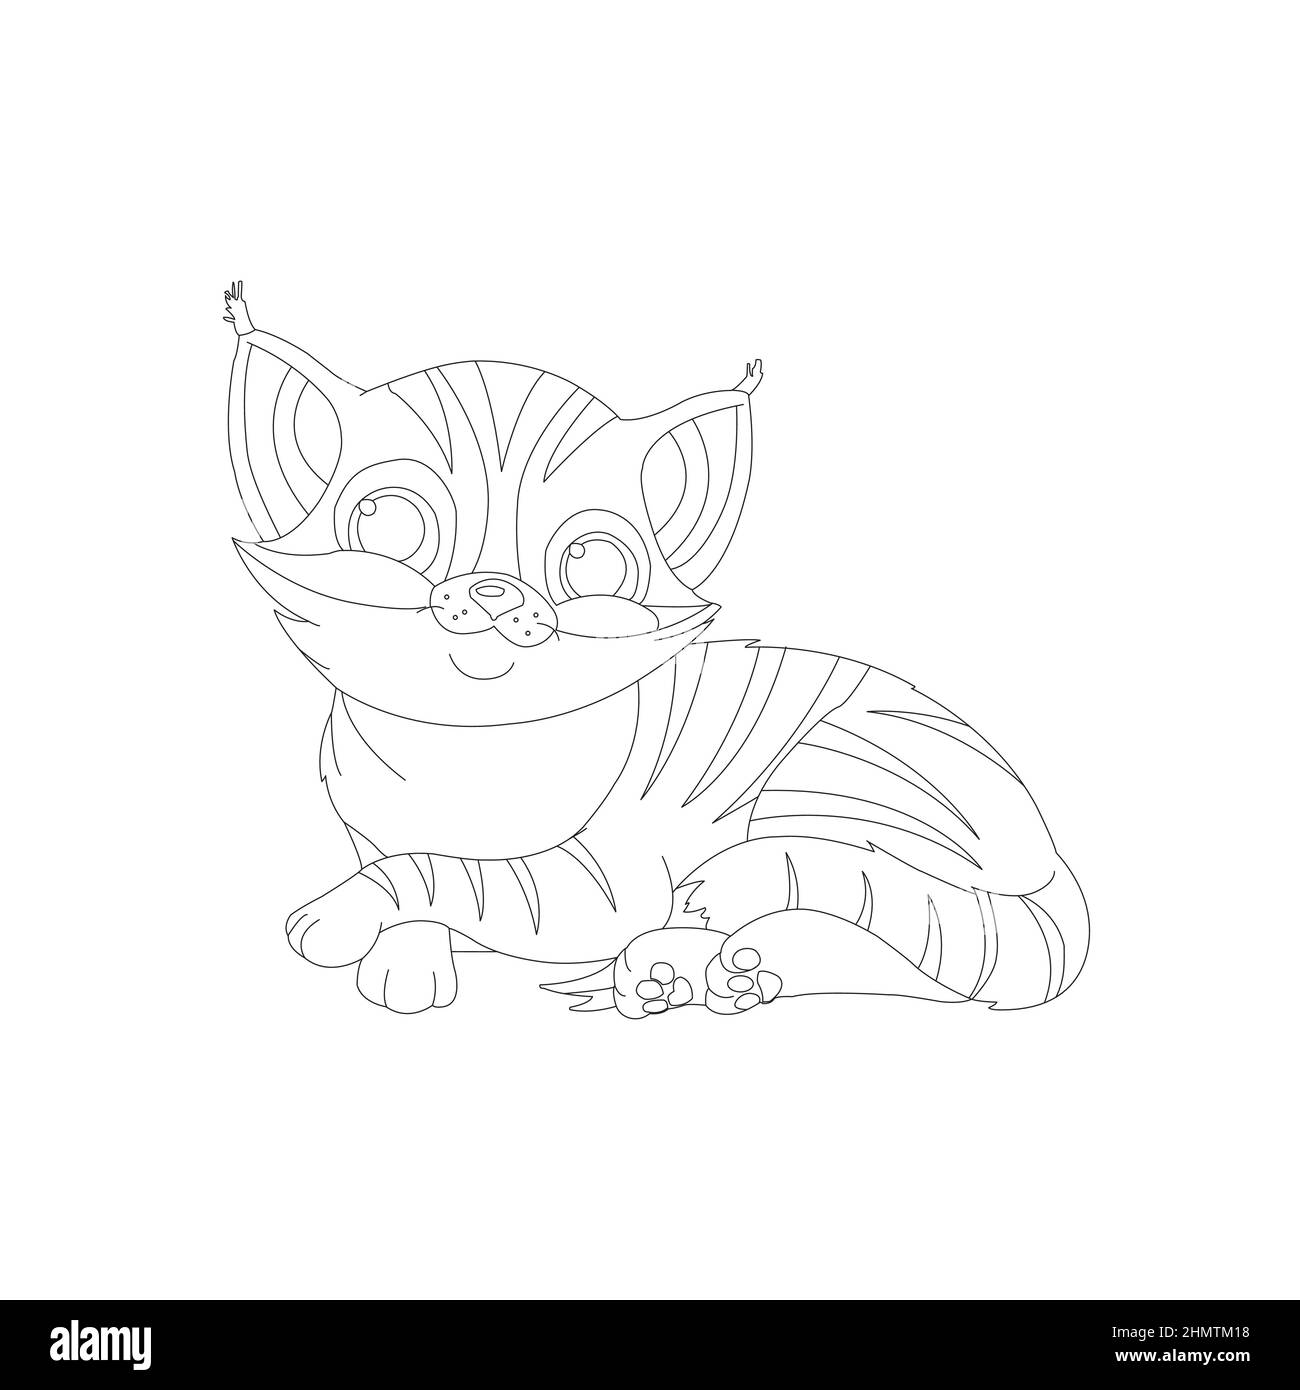 Coloring page outline of cute cat Animal Coloring page cartoon ...